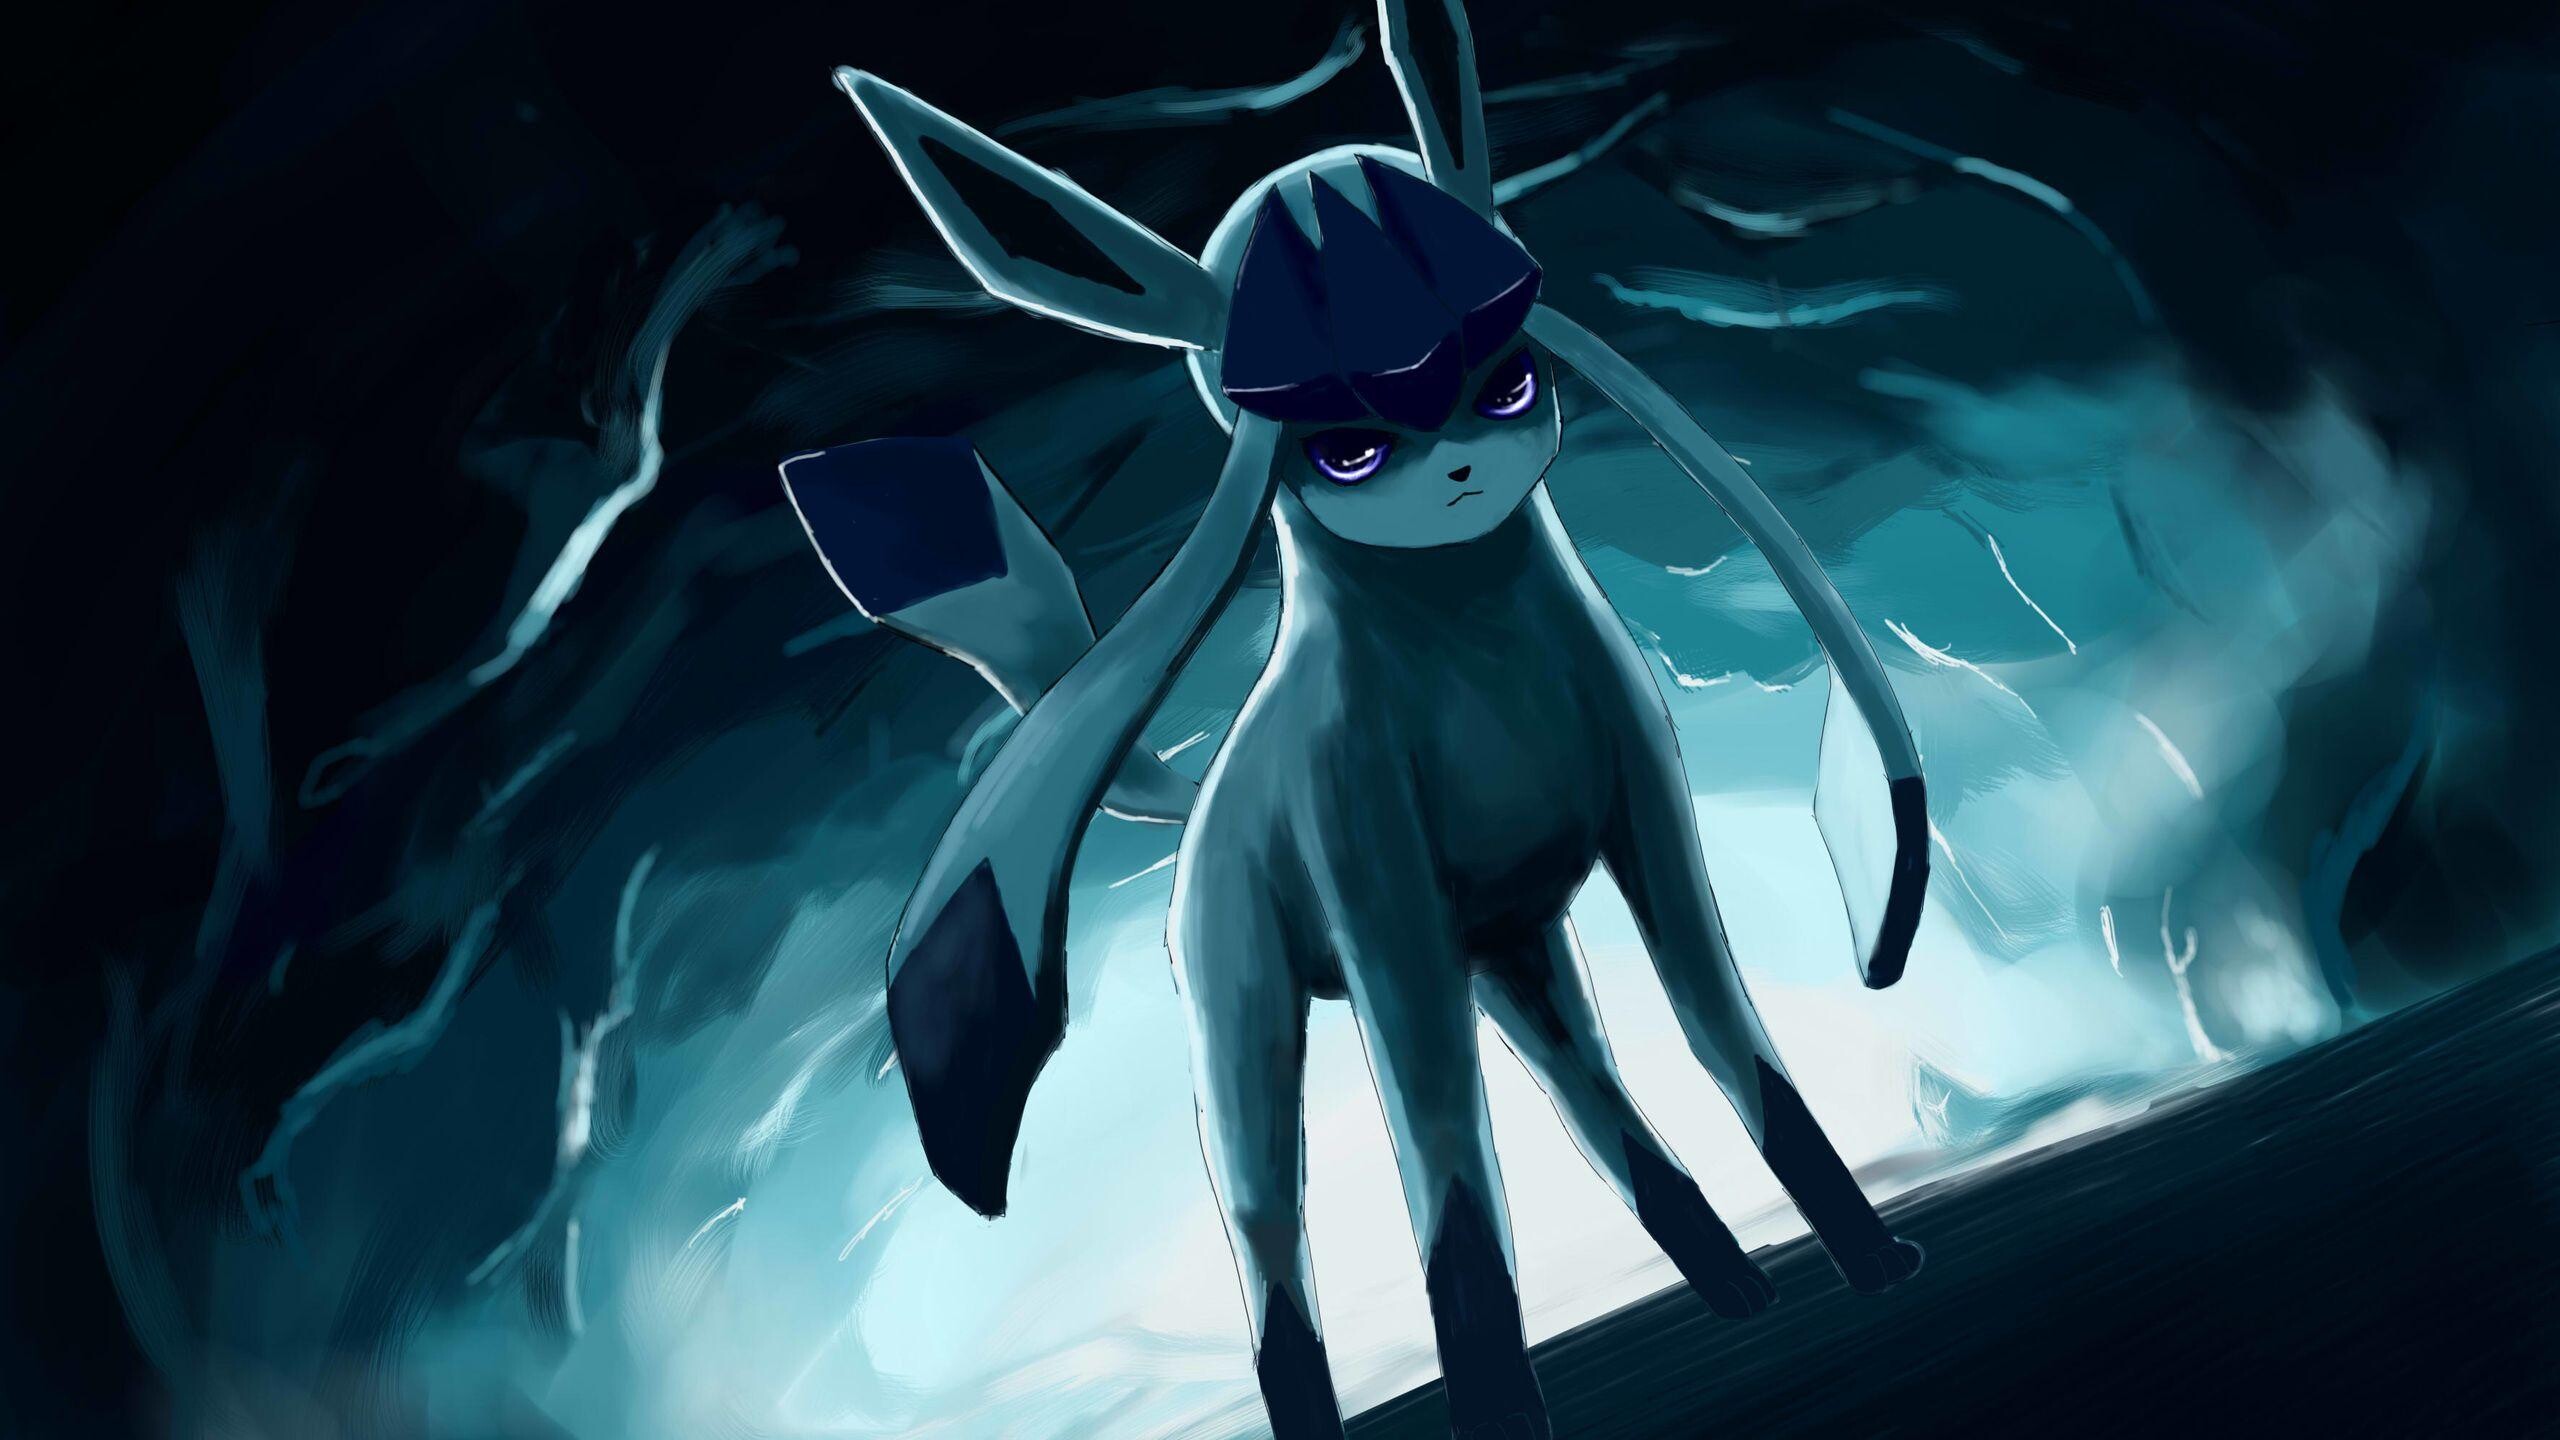 Glaceon: Small dainty paws and feet that are dark blue in color, Docile, cool and collected behavior, A top choice for trainers. 2560x1440 HD Wallpaper.